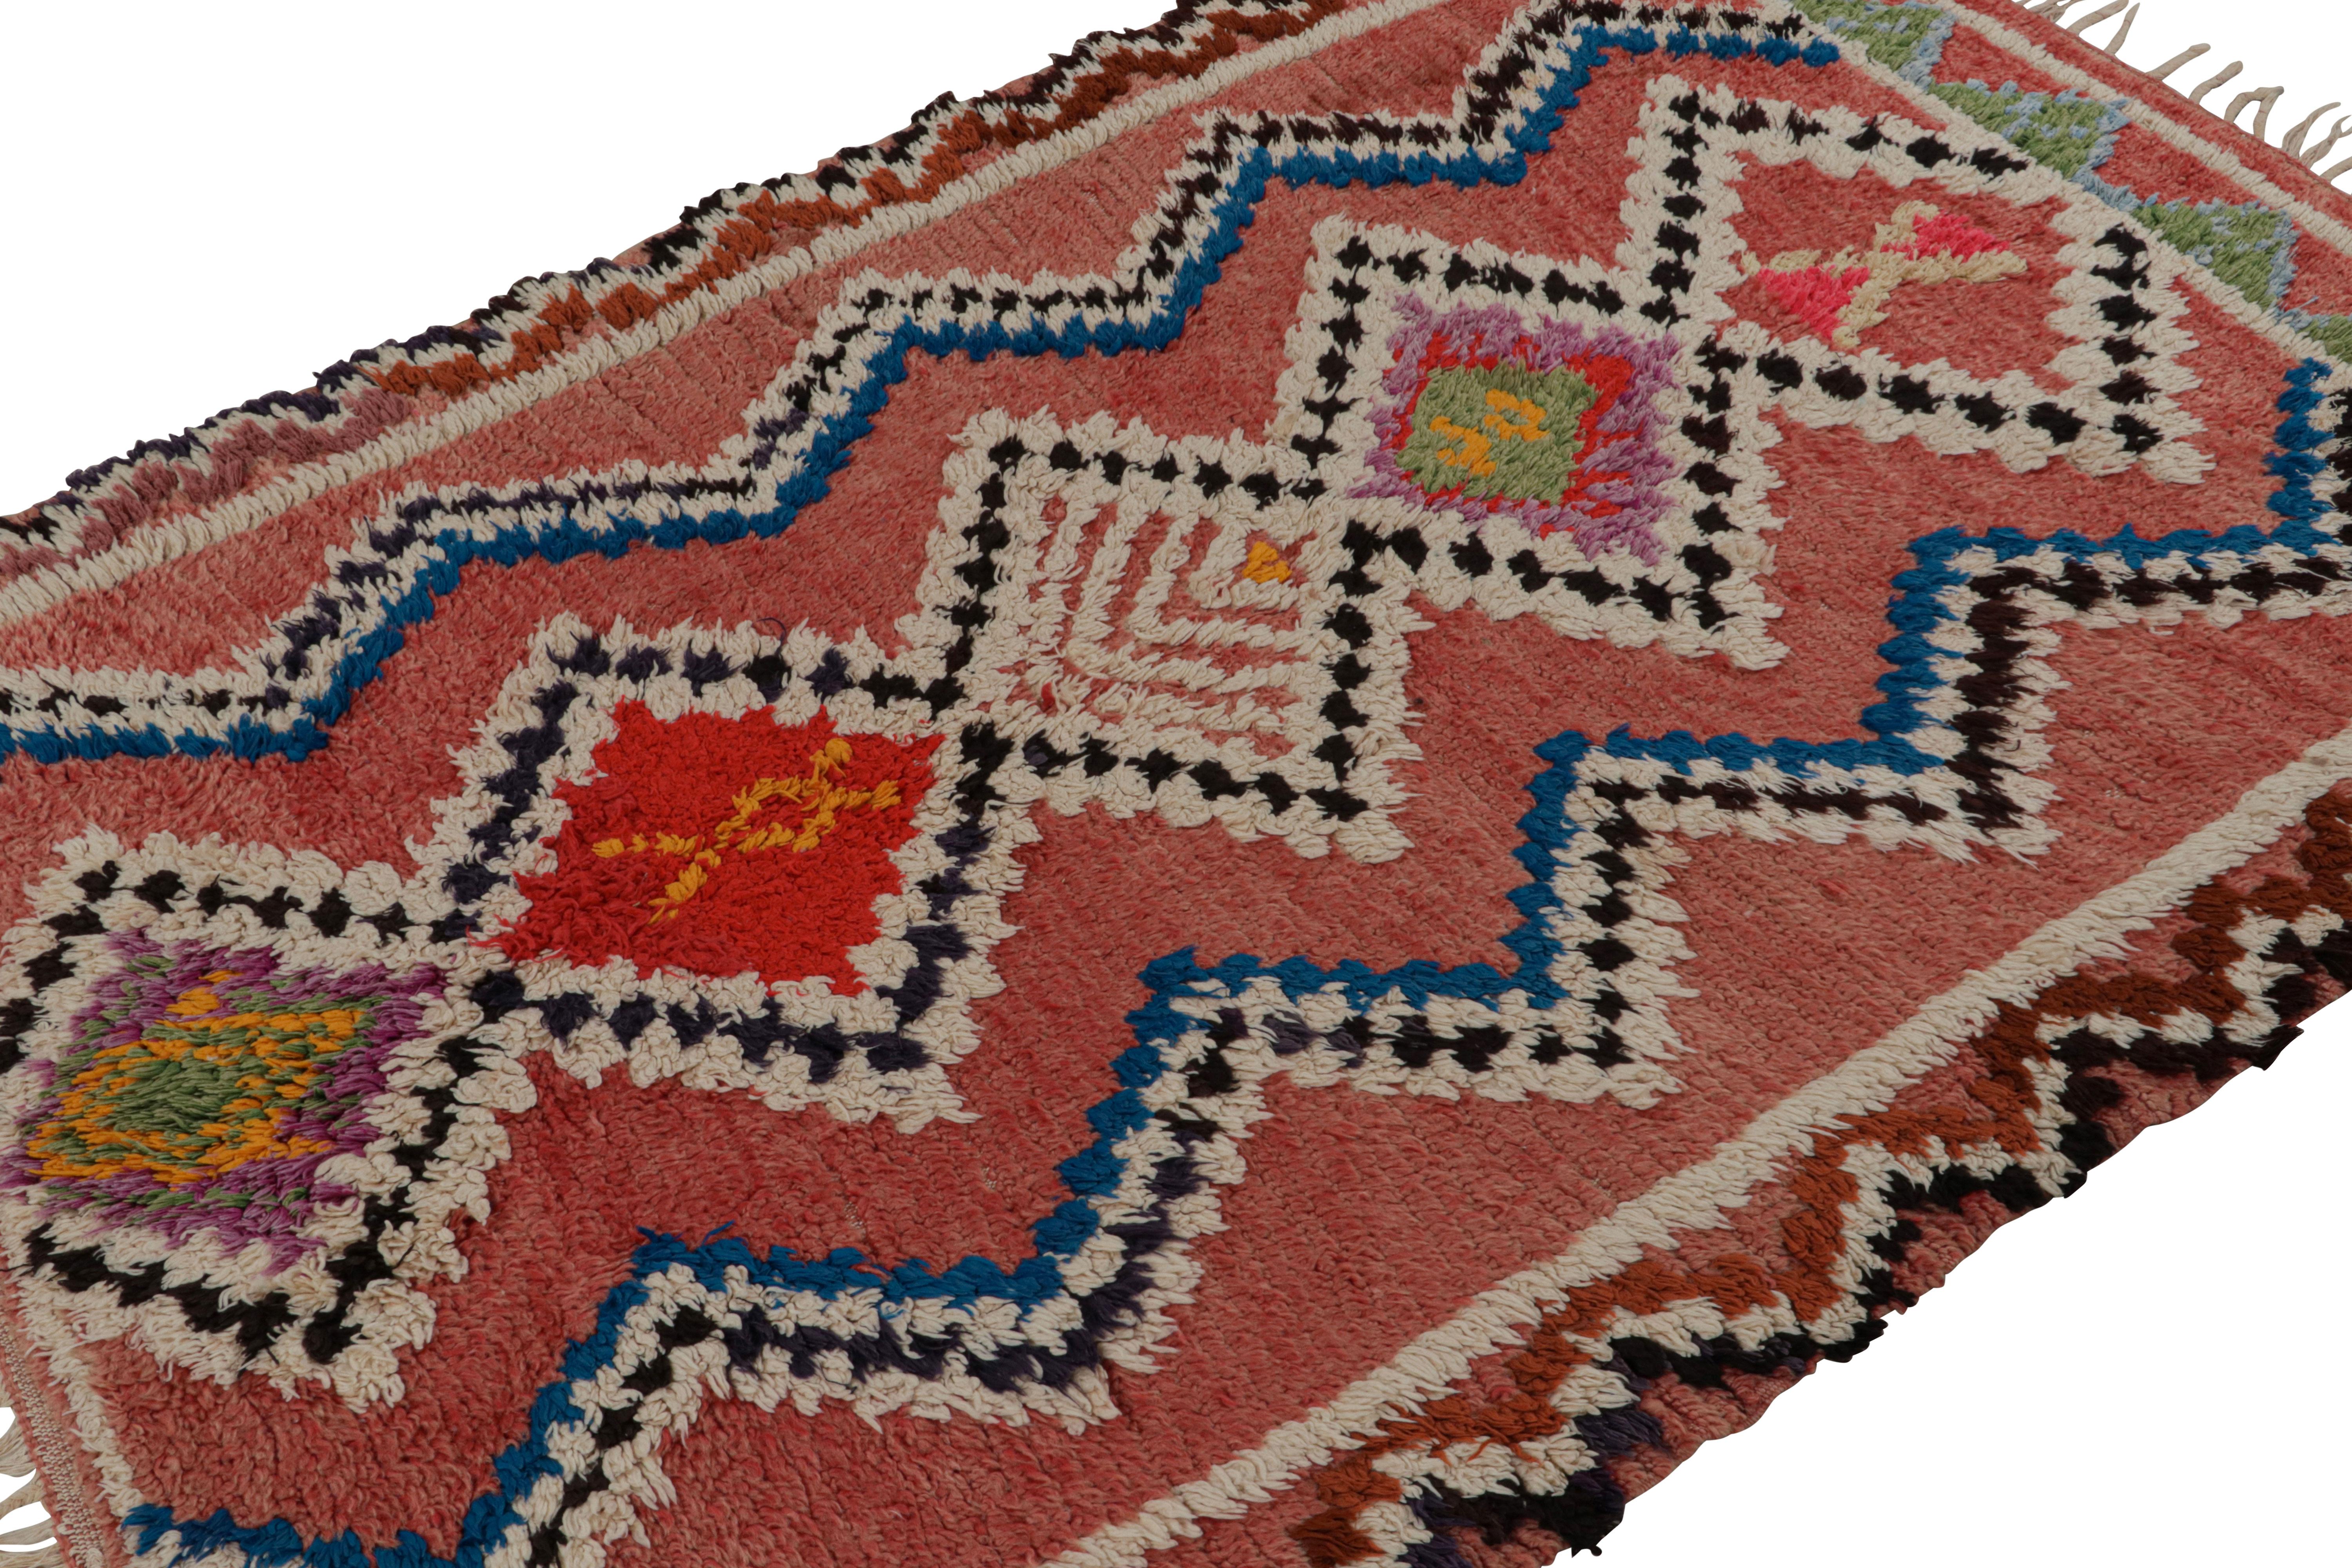 Hand-knotted in wool circa 1950-1960, this 5x7 vintage Moroccan rug with polychromatic geometric patterns and medallions hails from the Azilal tribe.  

On the Design: 

Connoisseurs may admire this runner as a bold, graphic piece with drama and